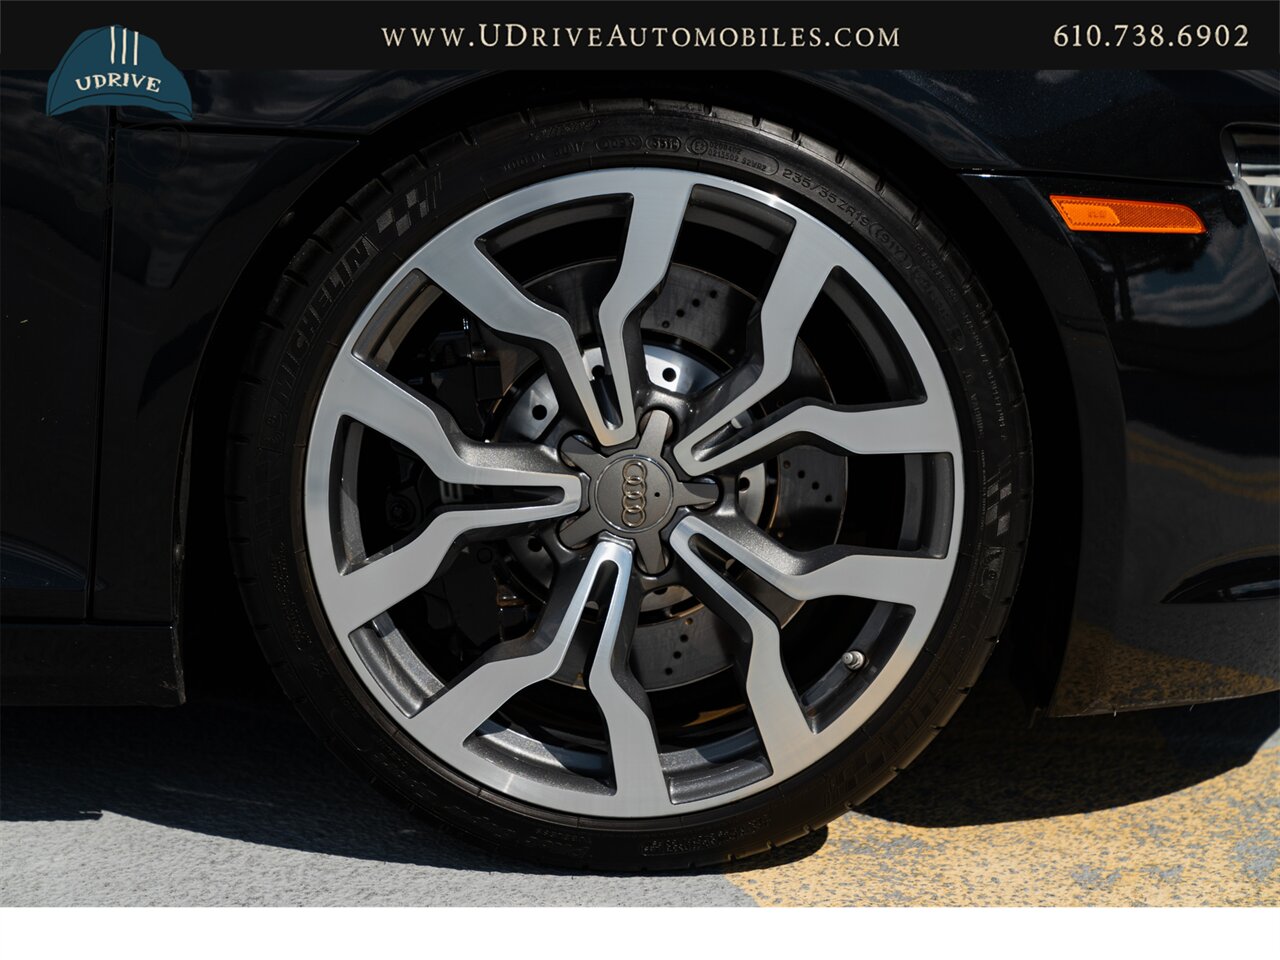 2011 Audi R8 5.2 Quattro  V10 6 Speed Manual - Photo 52 - West Chester, PA 19382